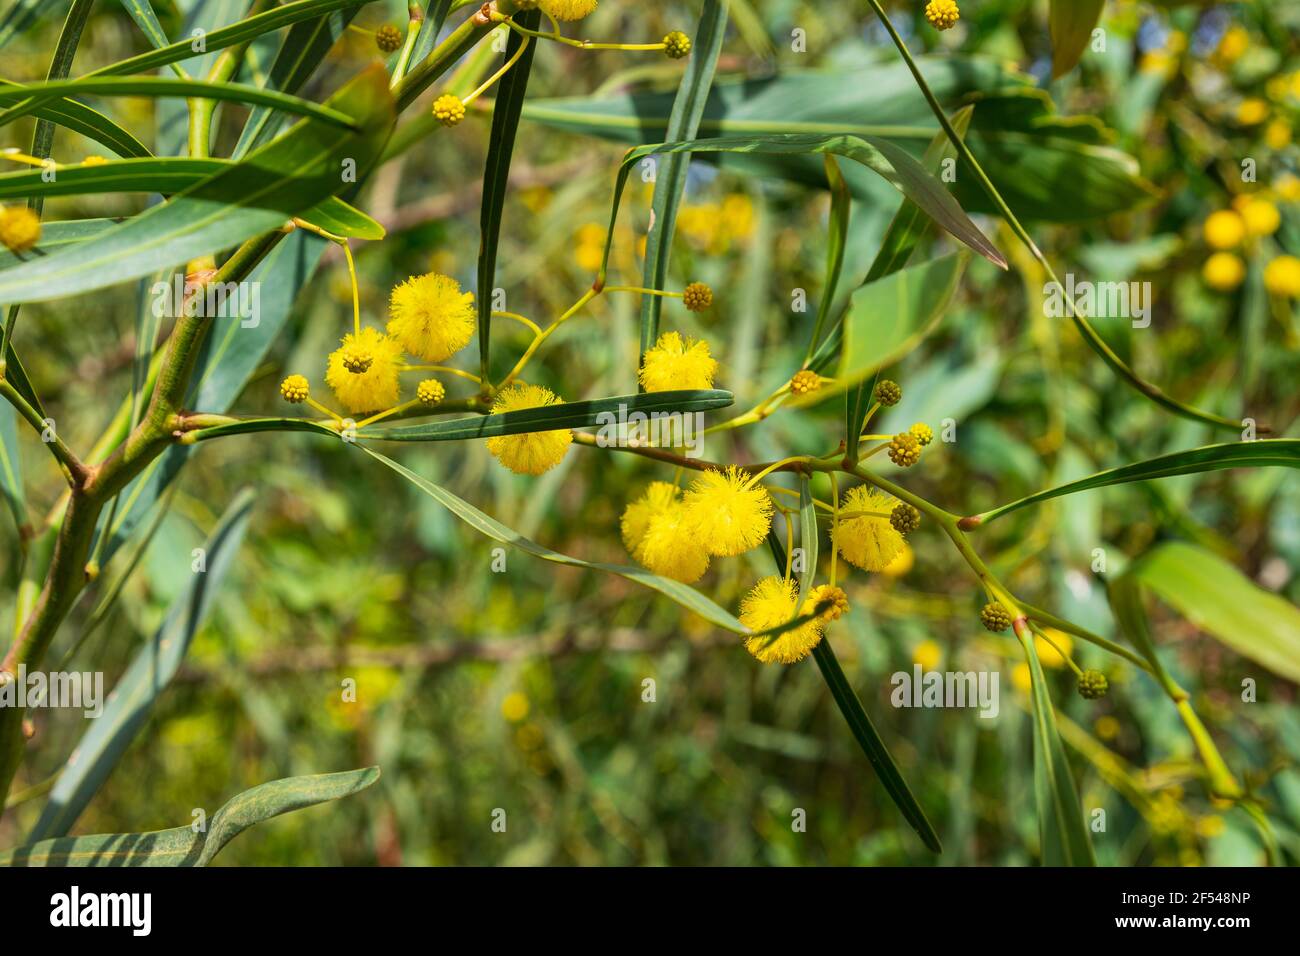 Yellow flowers of acacia saligna Golden Wreath Wattle tree close-up on blurred green background Stock Photo